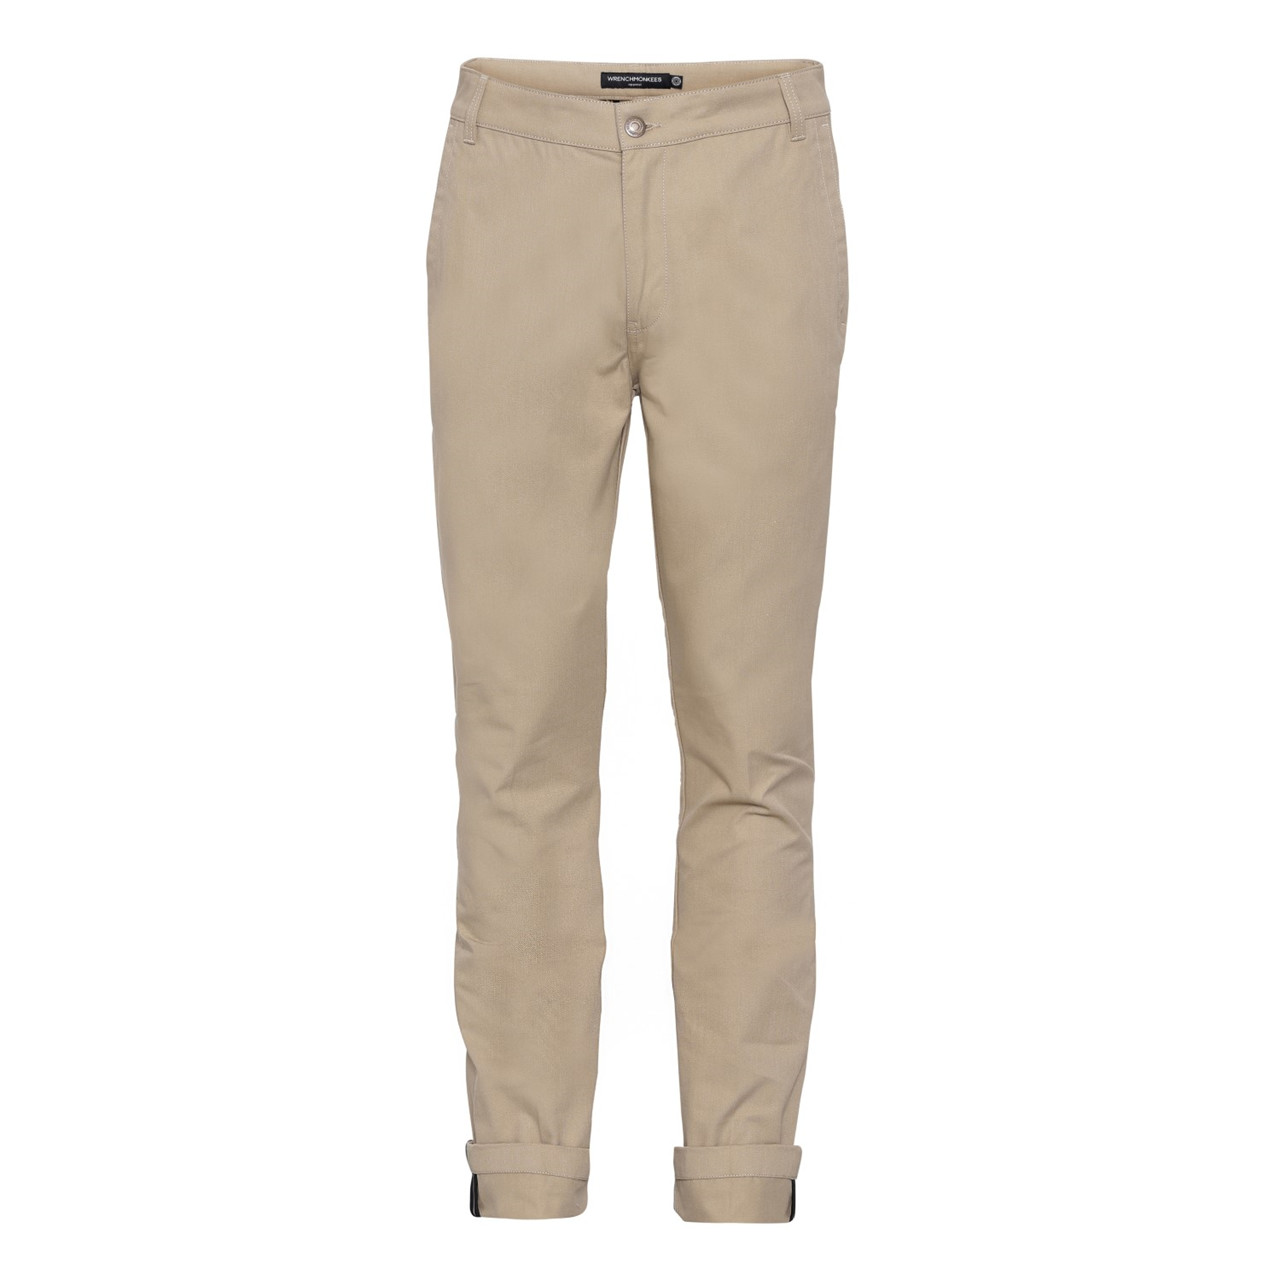 WRENCHMONKEES Tappered Chino (Khaki, W33 / L34) (5710466676392)